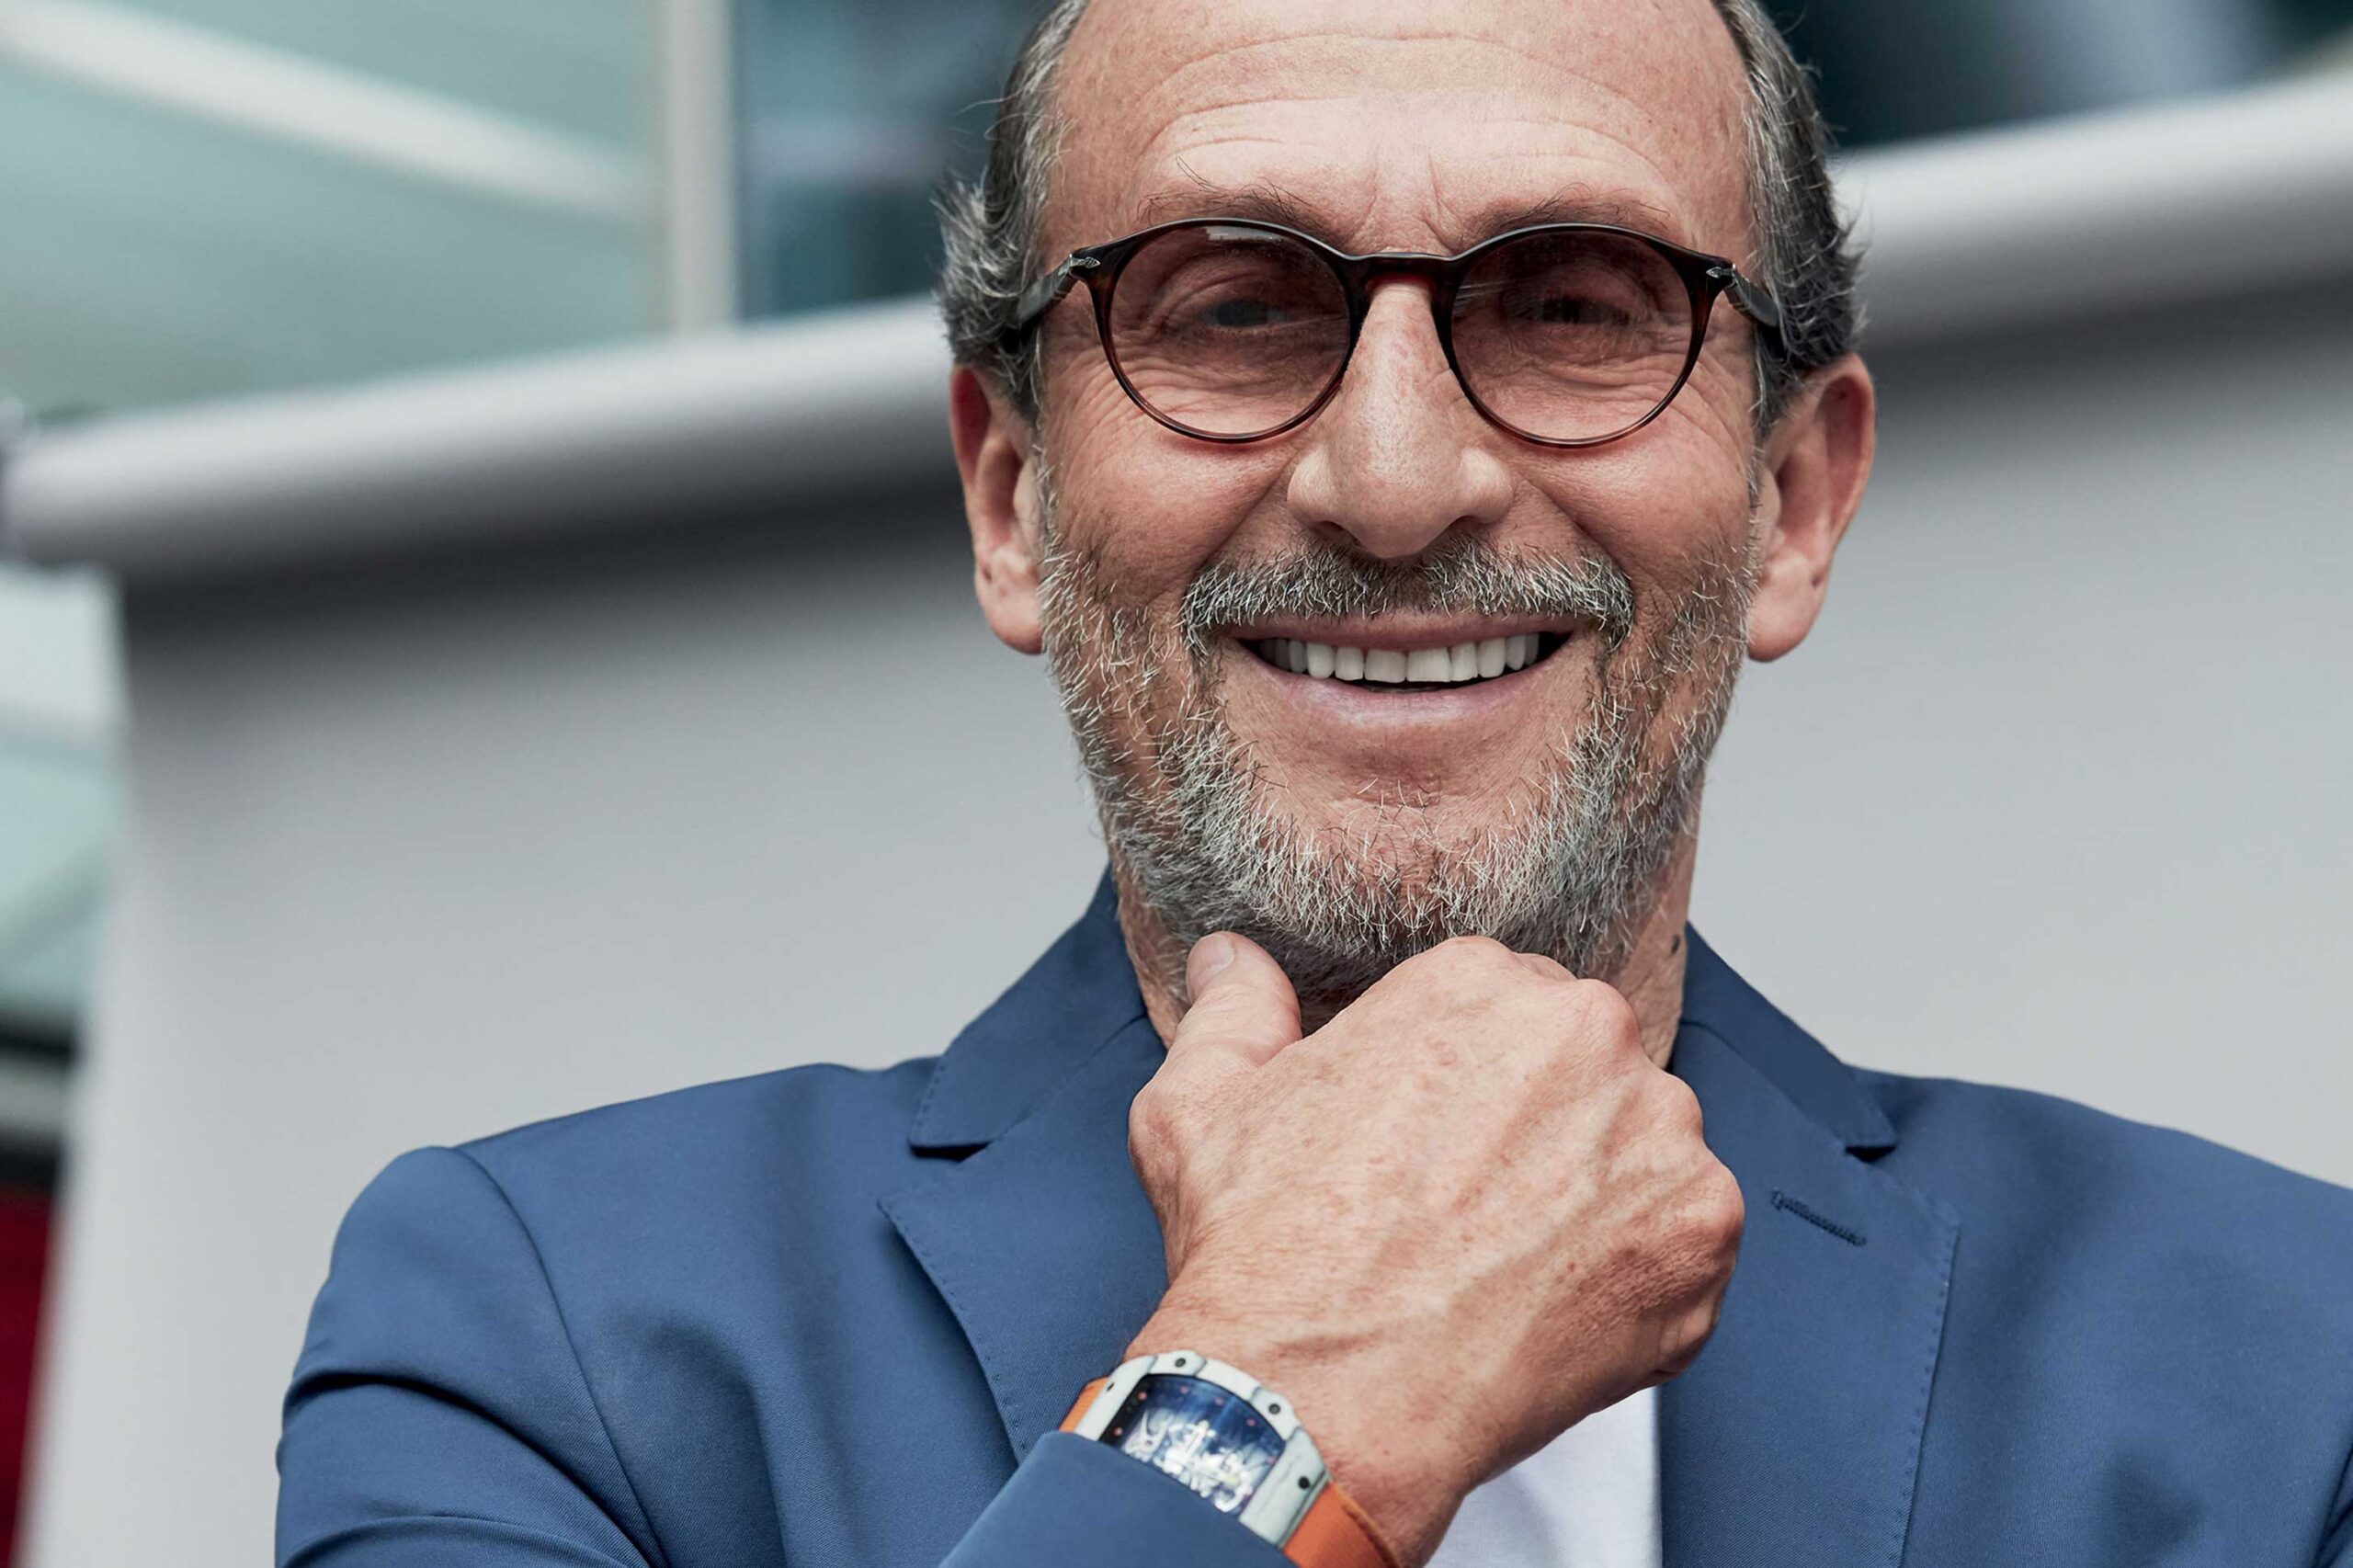 The man, the myth, the legend who set the tone for contemporary watchmaking, Richard Mille